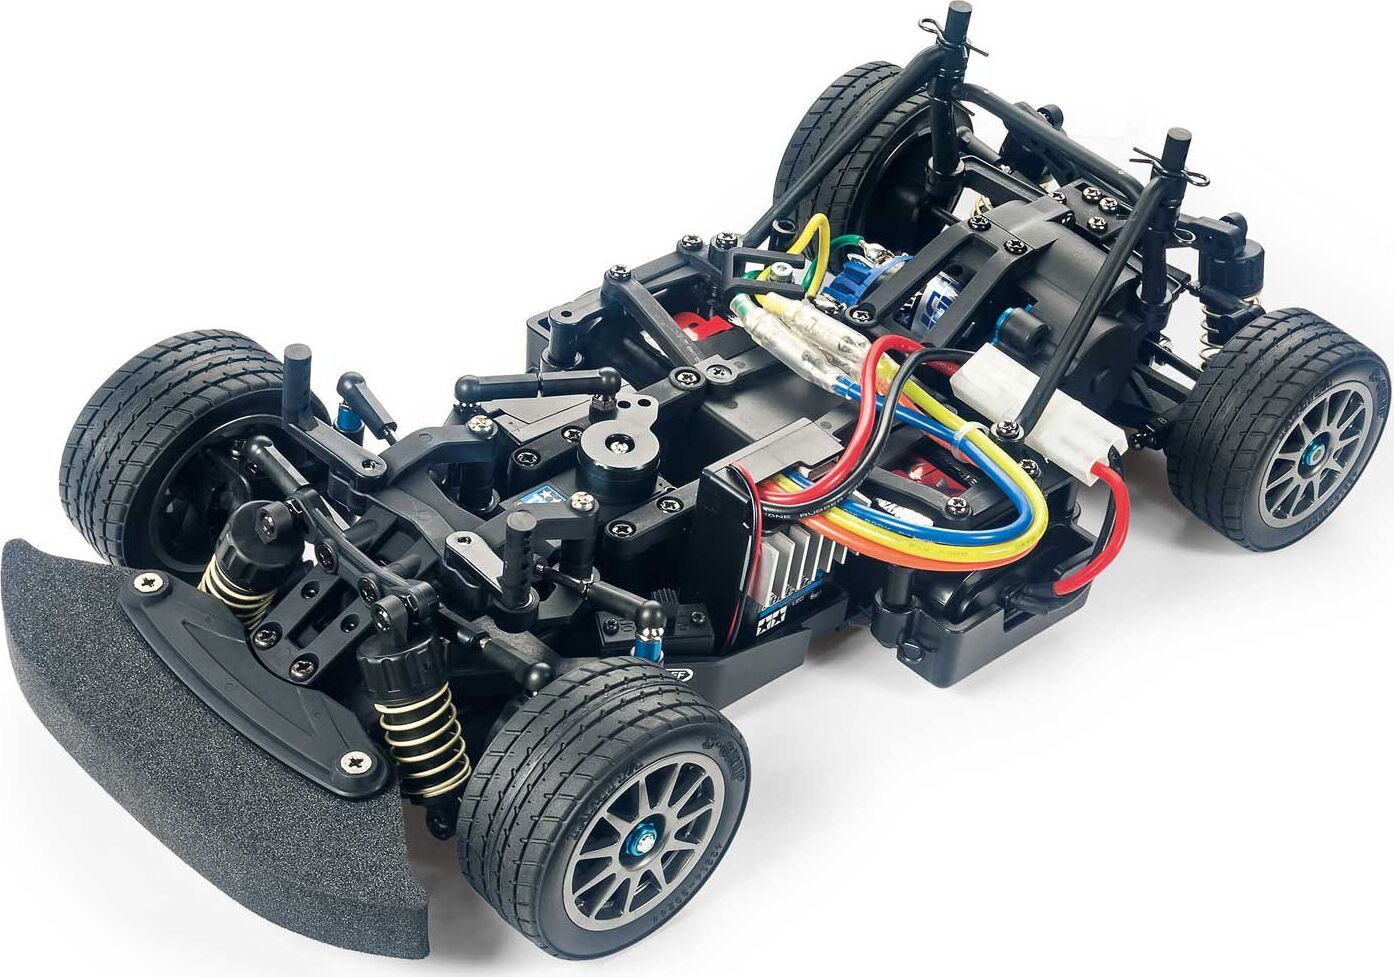 1/10 M-08 Concept Chassis 2WD Kit